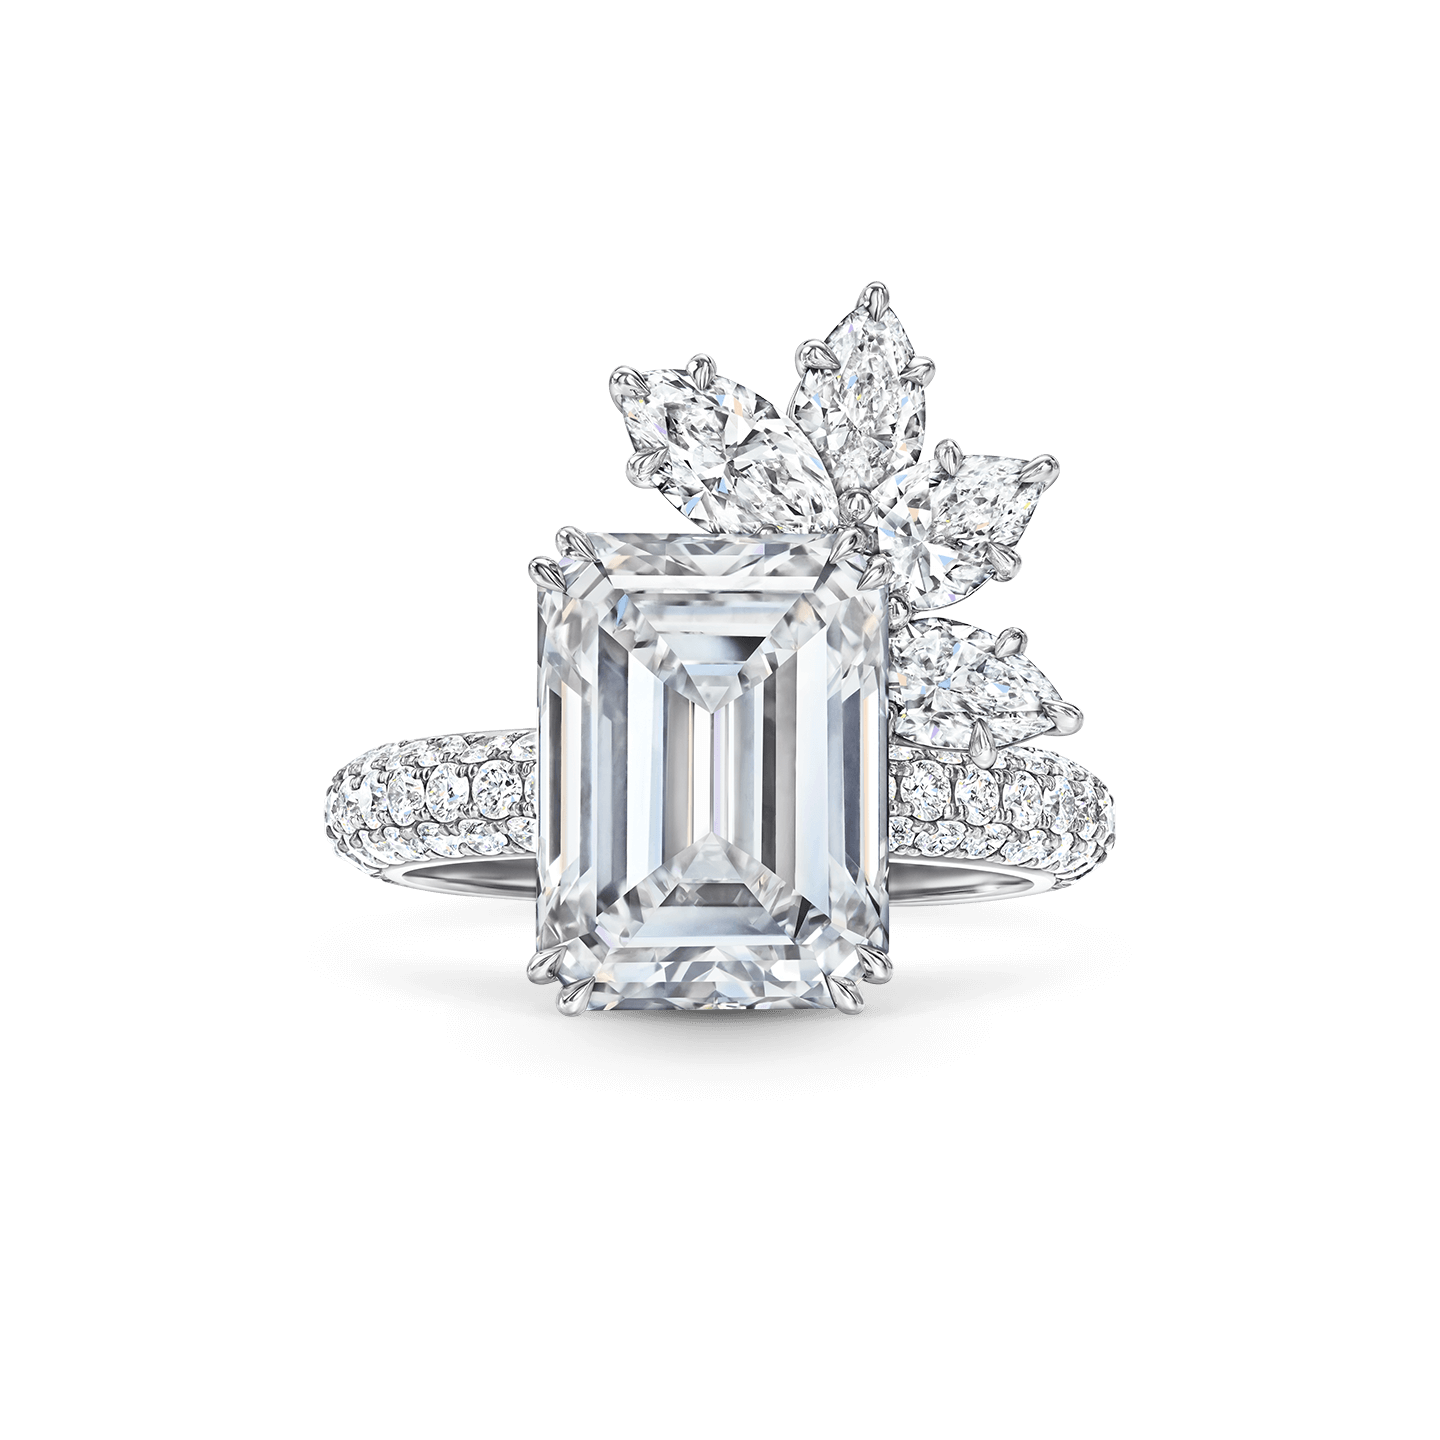 Front view of the Bridal Couture Emerald-Cut Diamond Engagement Ring